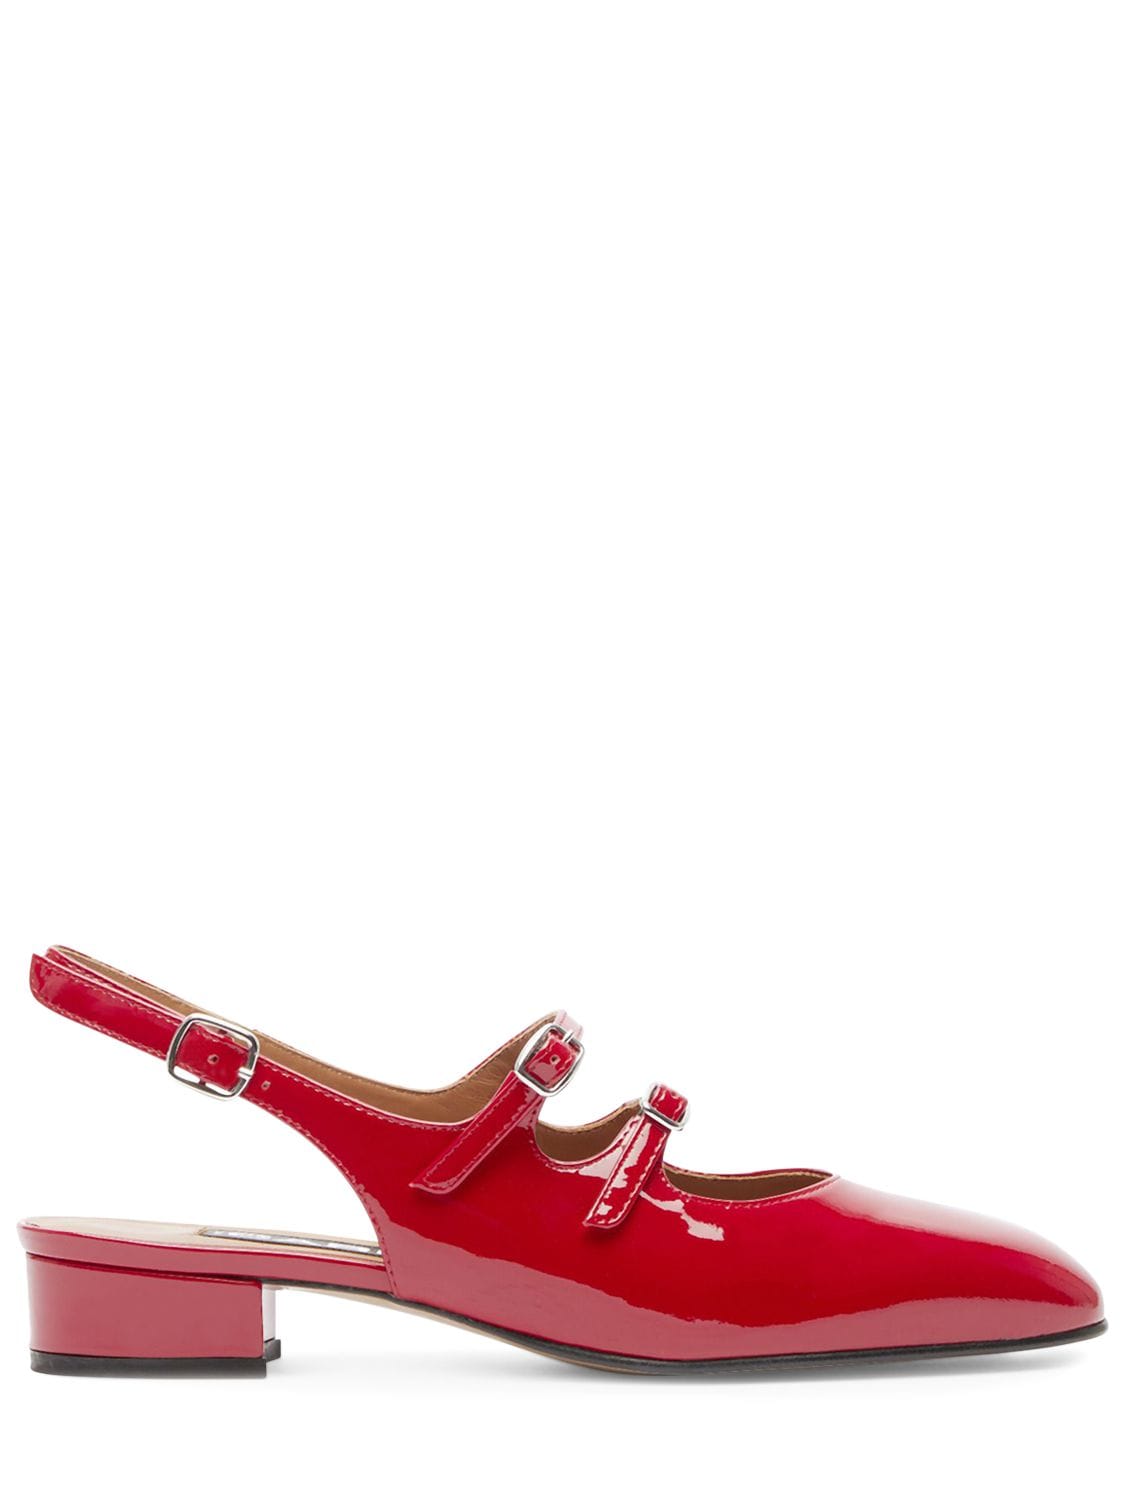 Carel 20mm Peche Patent Leather Slingbacks In Red